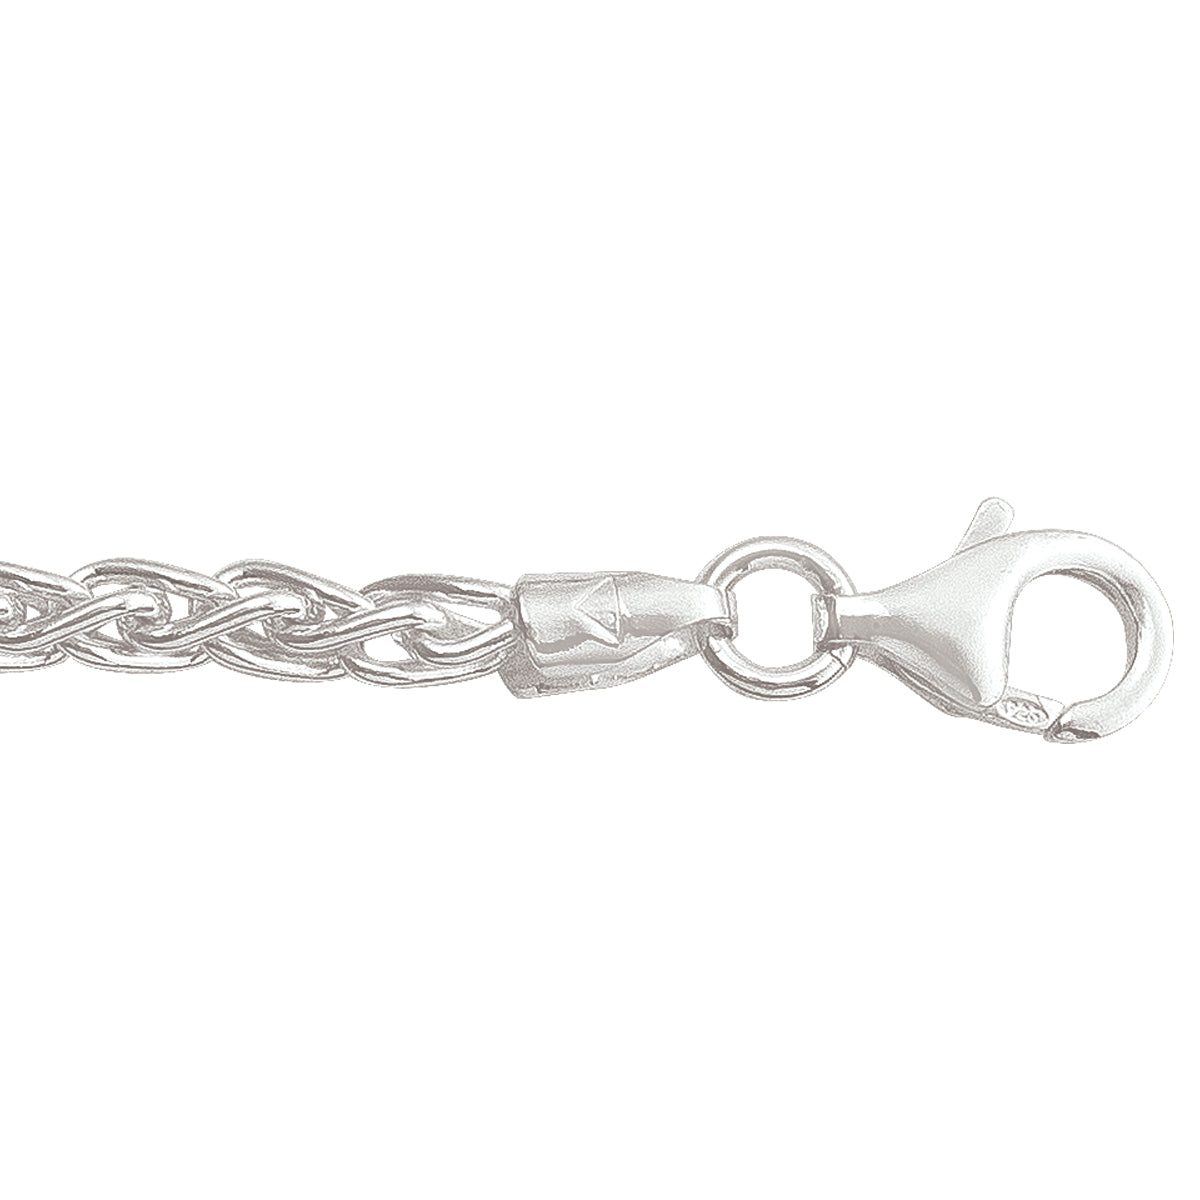 CHAINS SILVER SOLID ROUND WHEAT LINK 